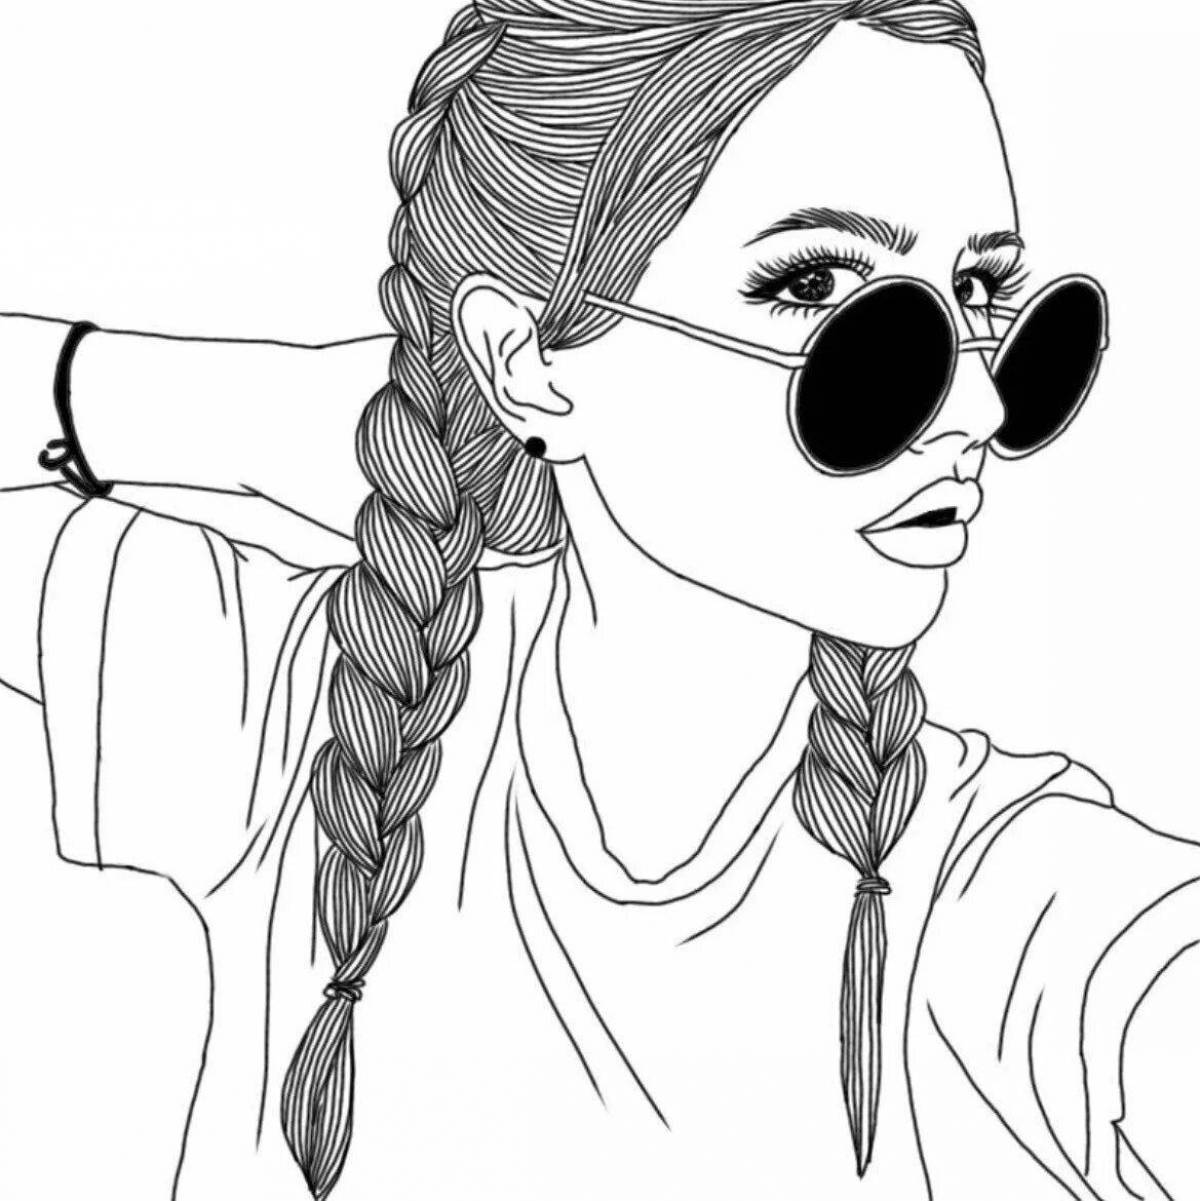 Delightful coloring pages of modern girls